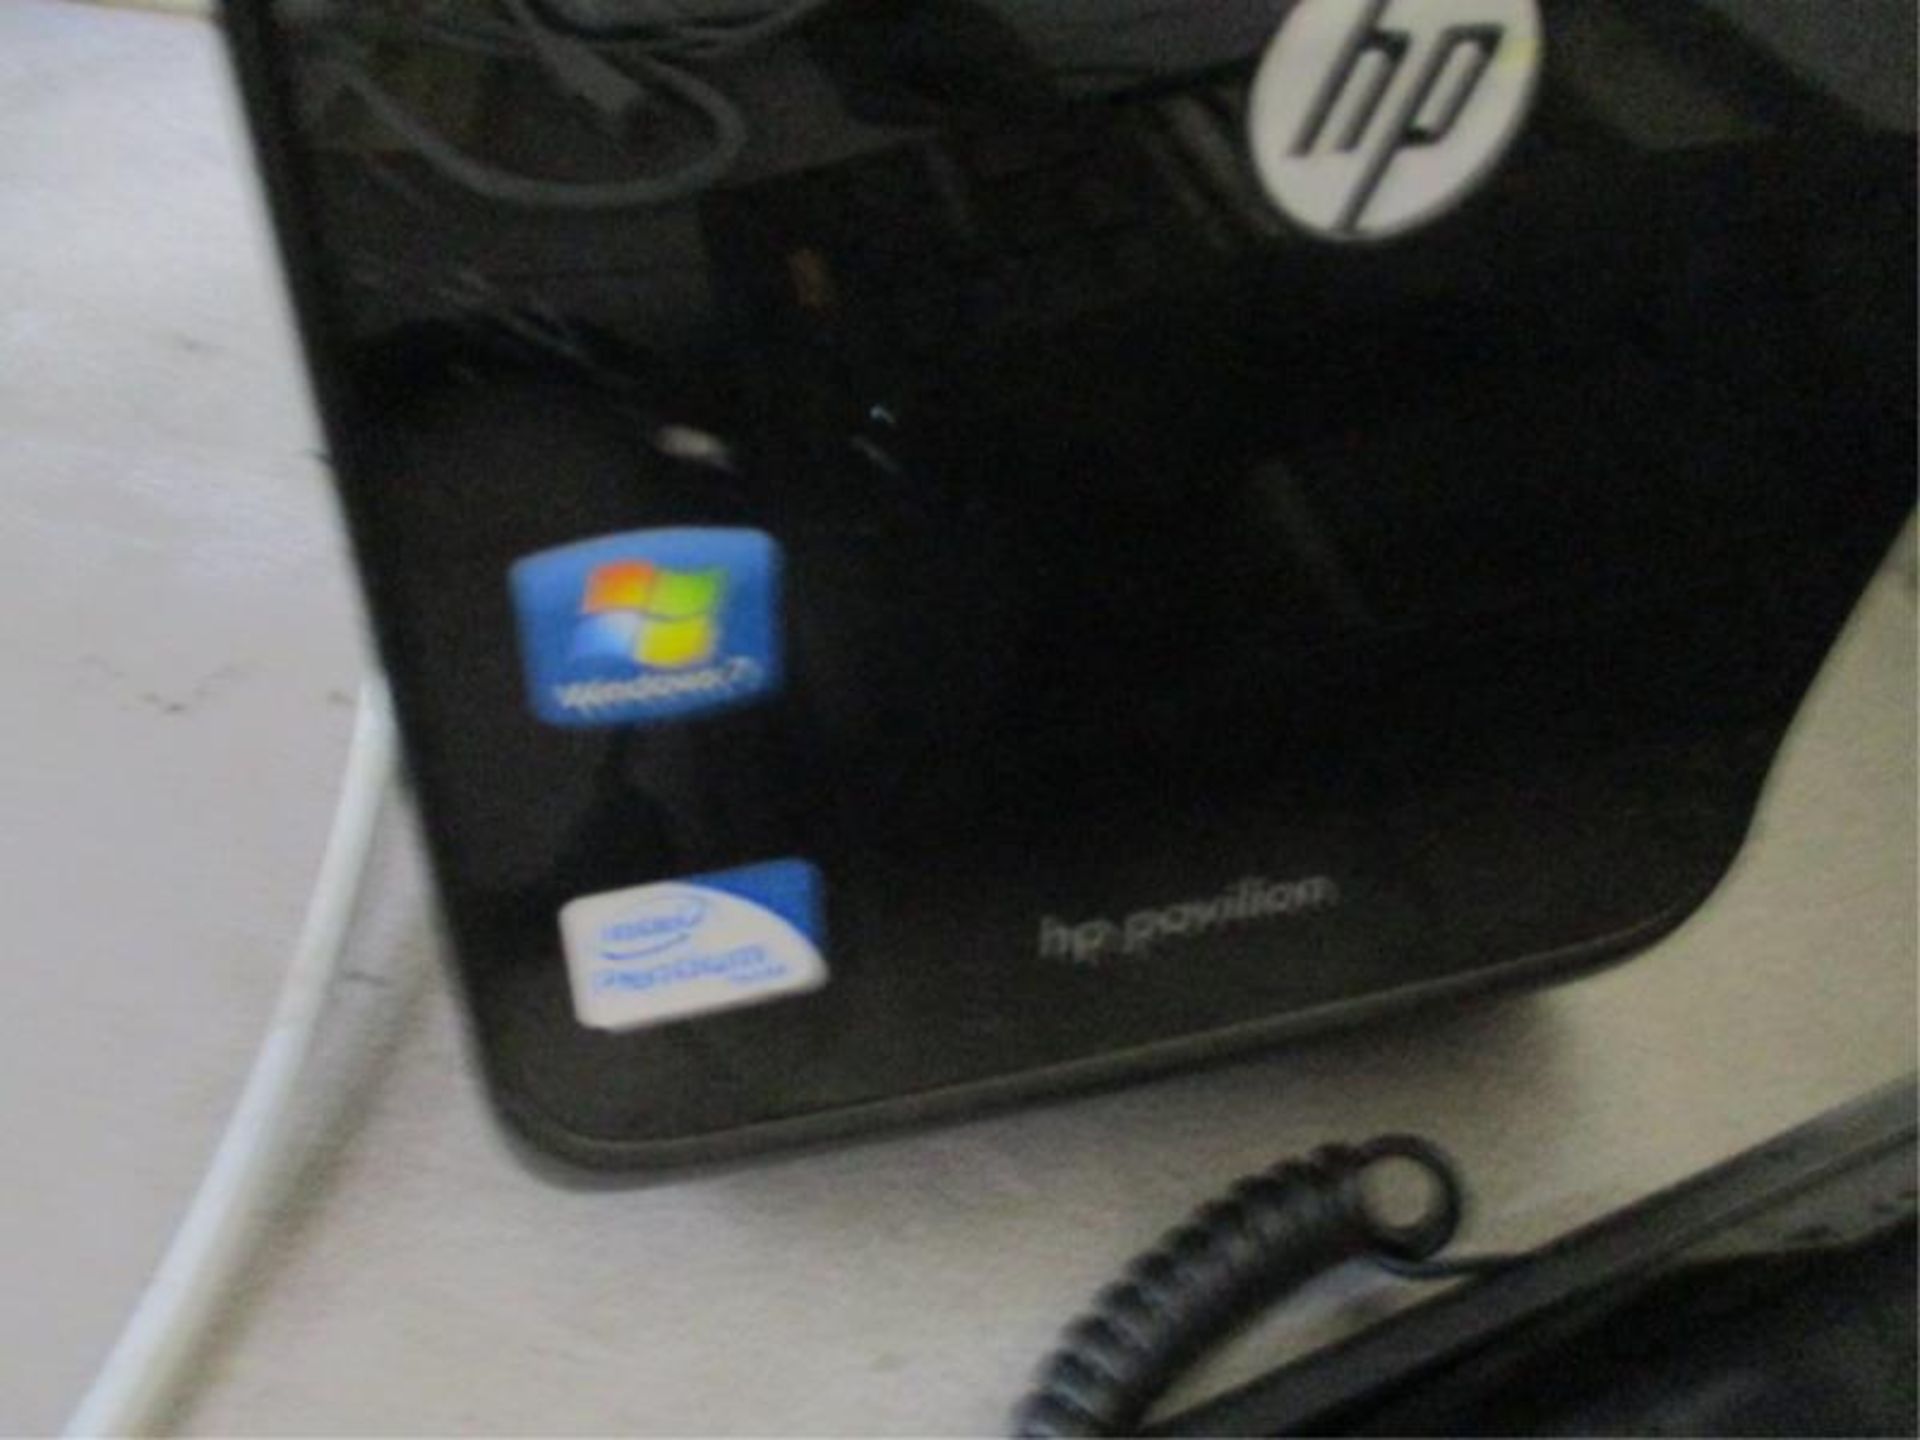 HP Pavilion PG Series, Windows 7 with 19 in Flat Screen monitor - Image 3 of 4